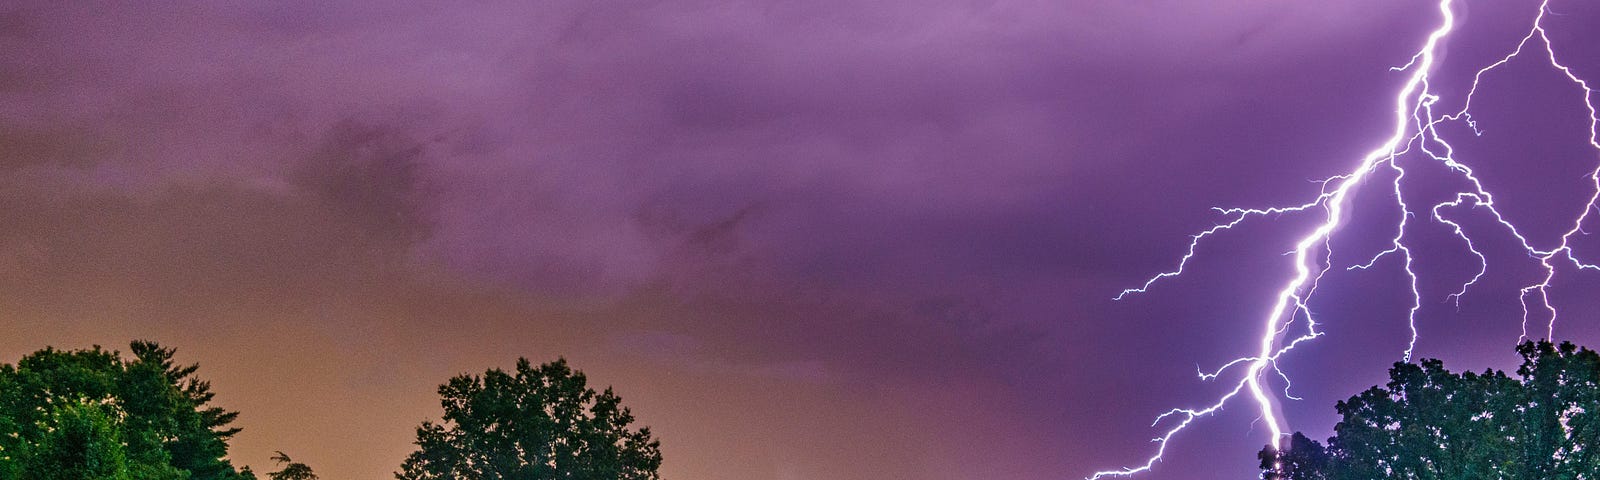 color photograph of brilliant lightning striking in the violet sky with a green grassy foreground and a small white house in the left front corner